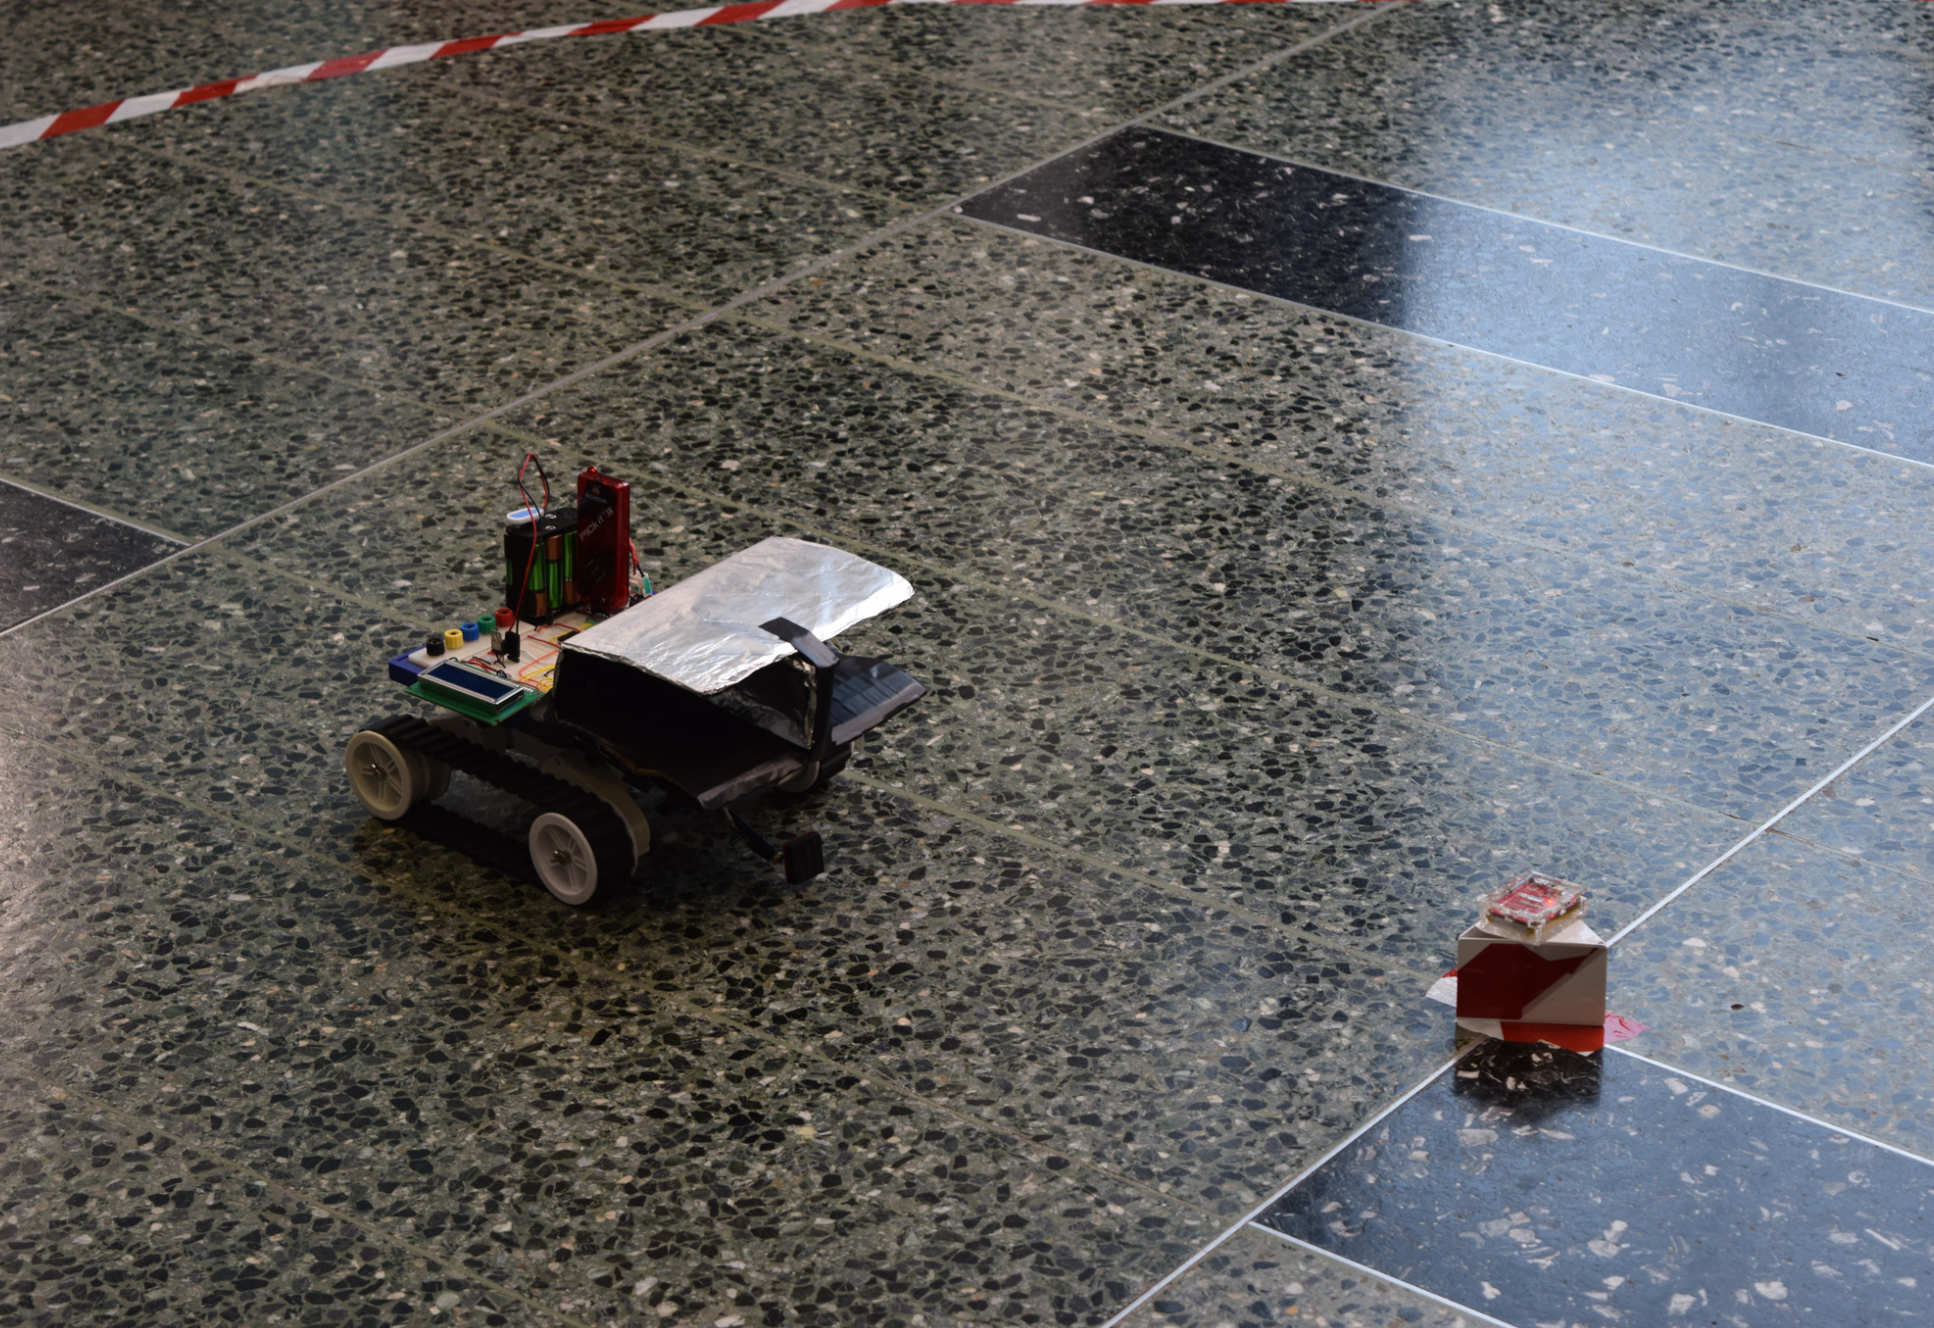 Robot and the device during the test